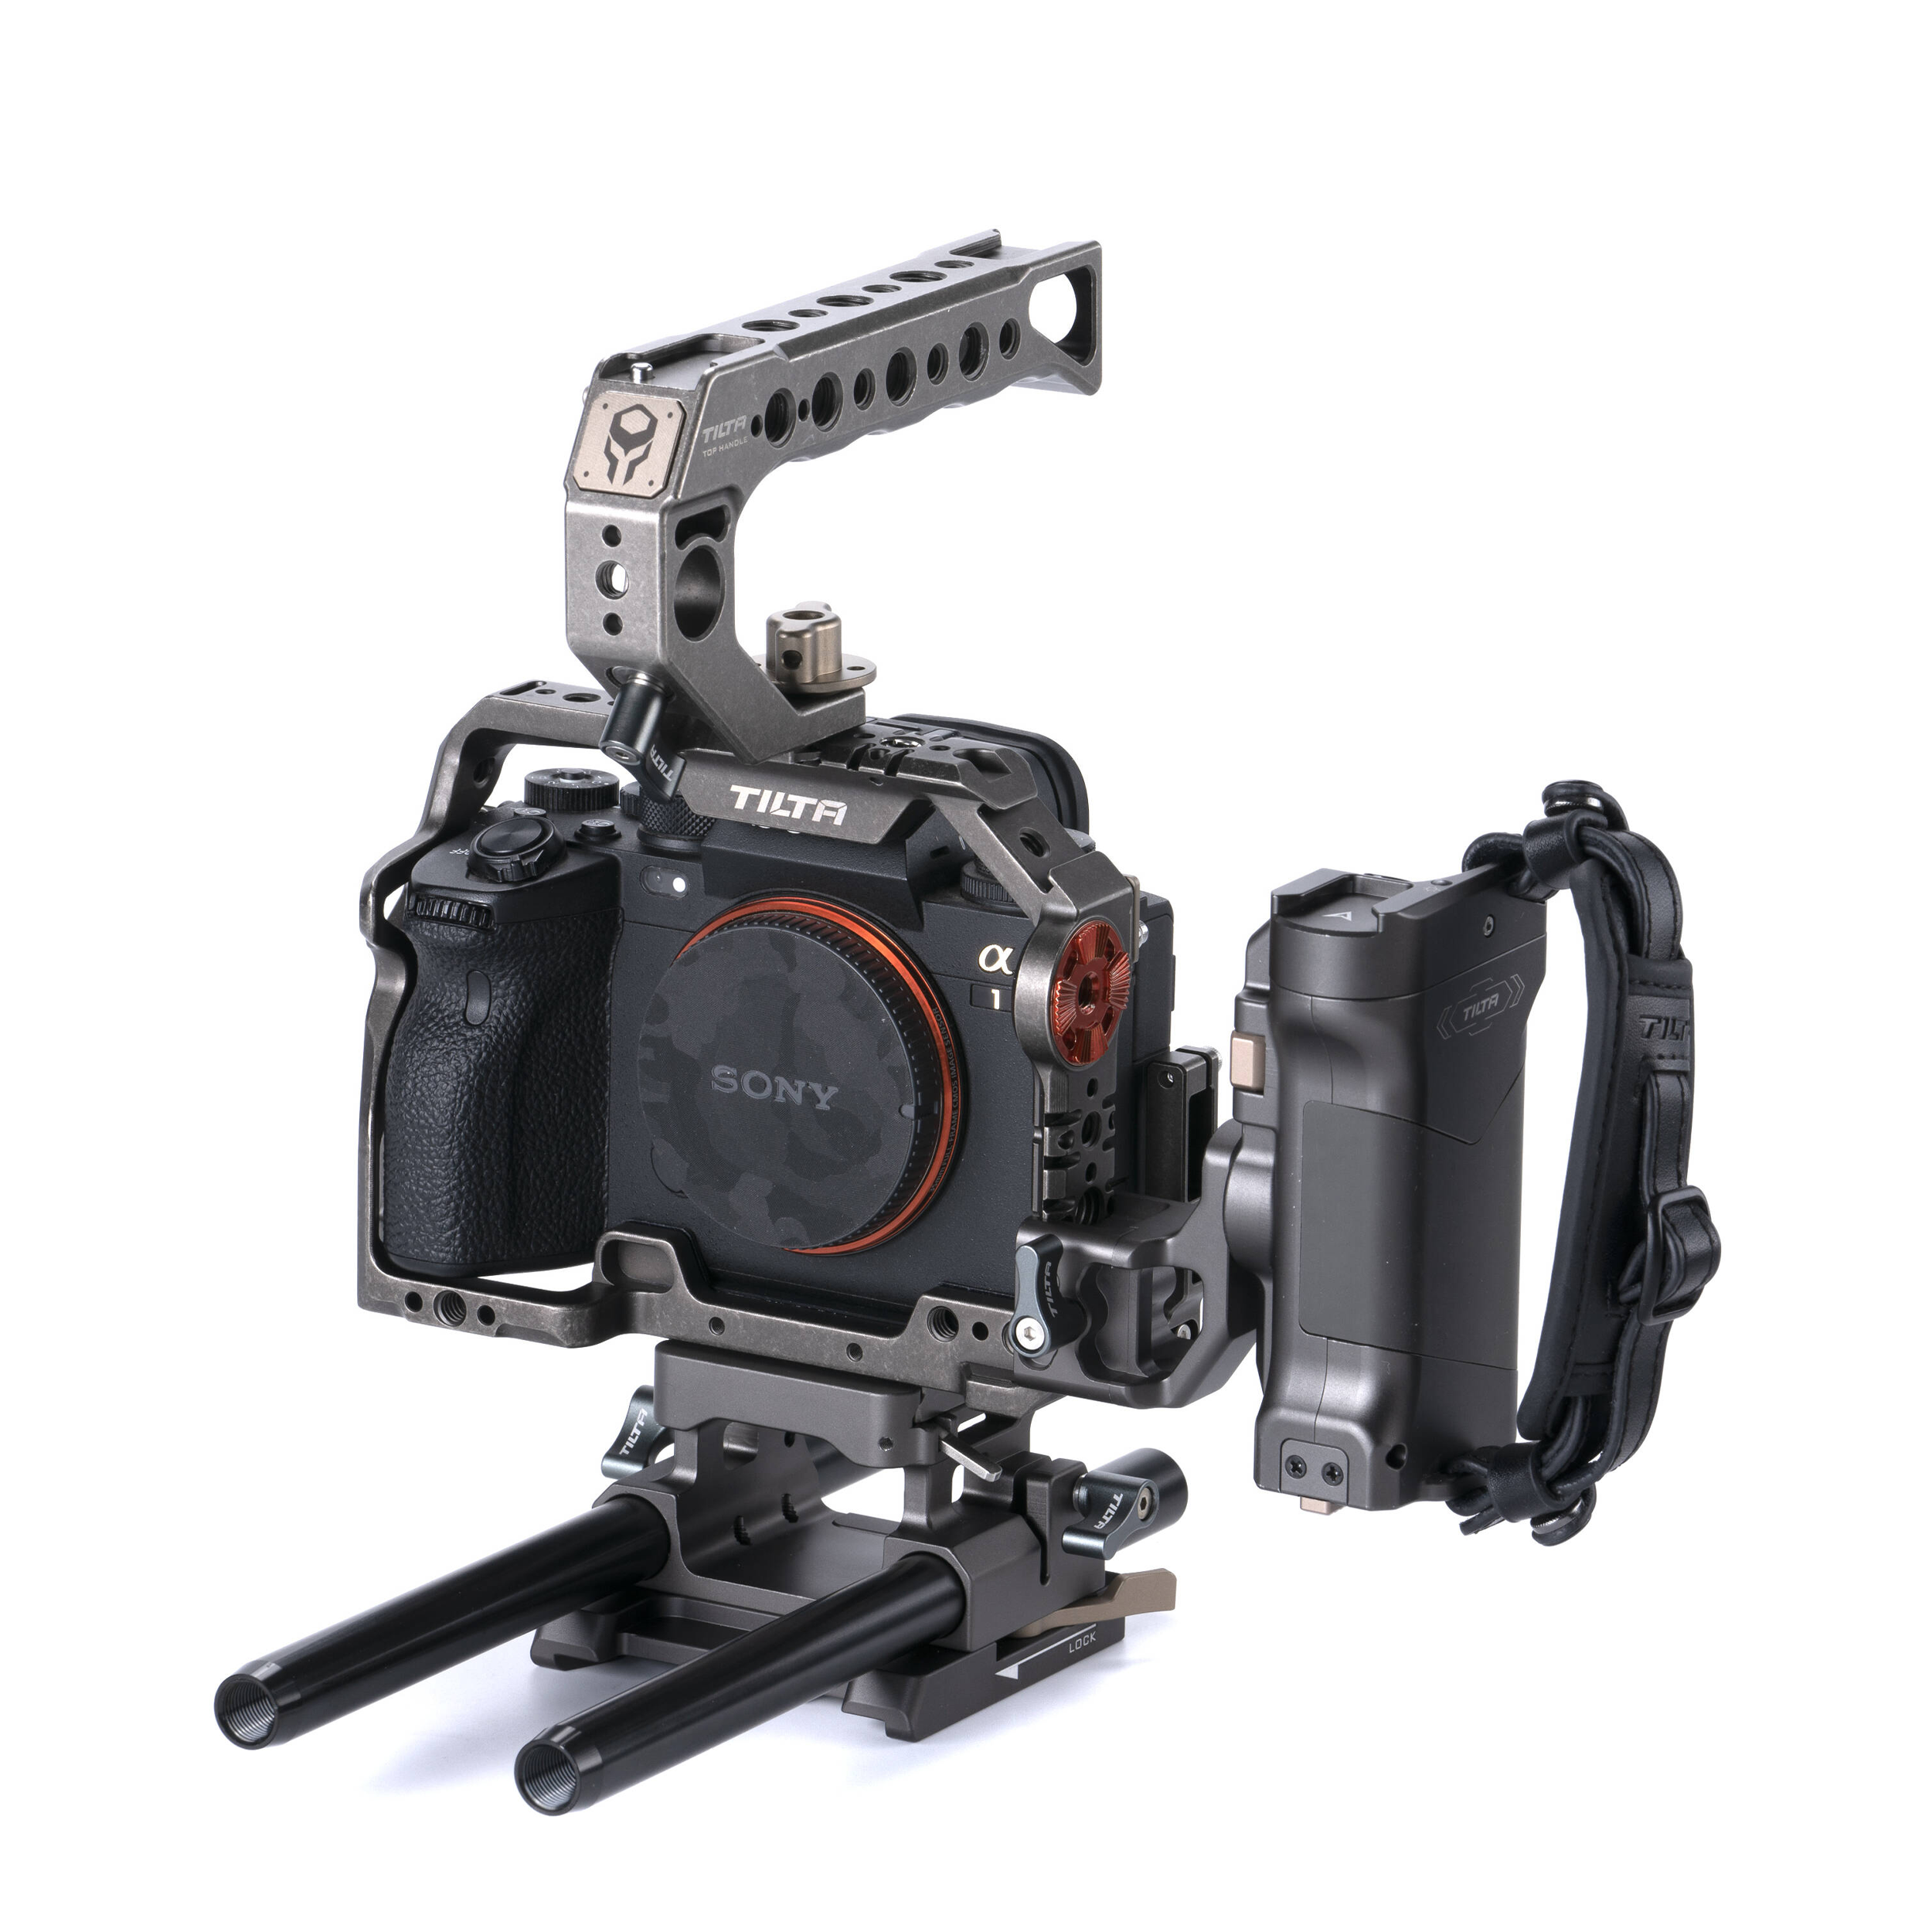 Tilta Pro Camera Kit for Sony a1 (Tactical Gray)